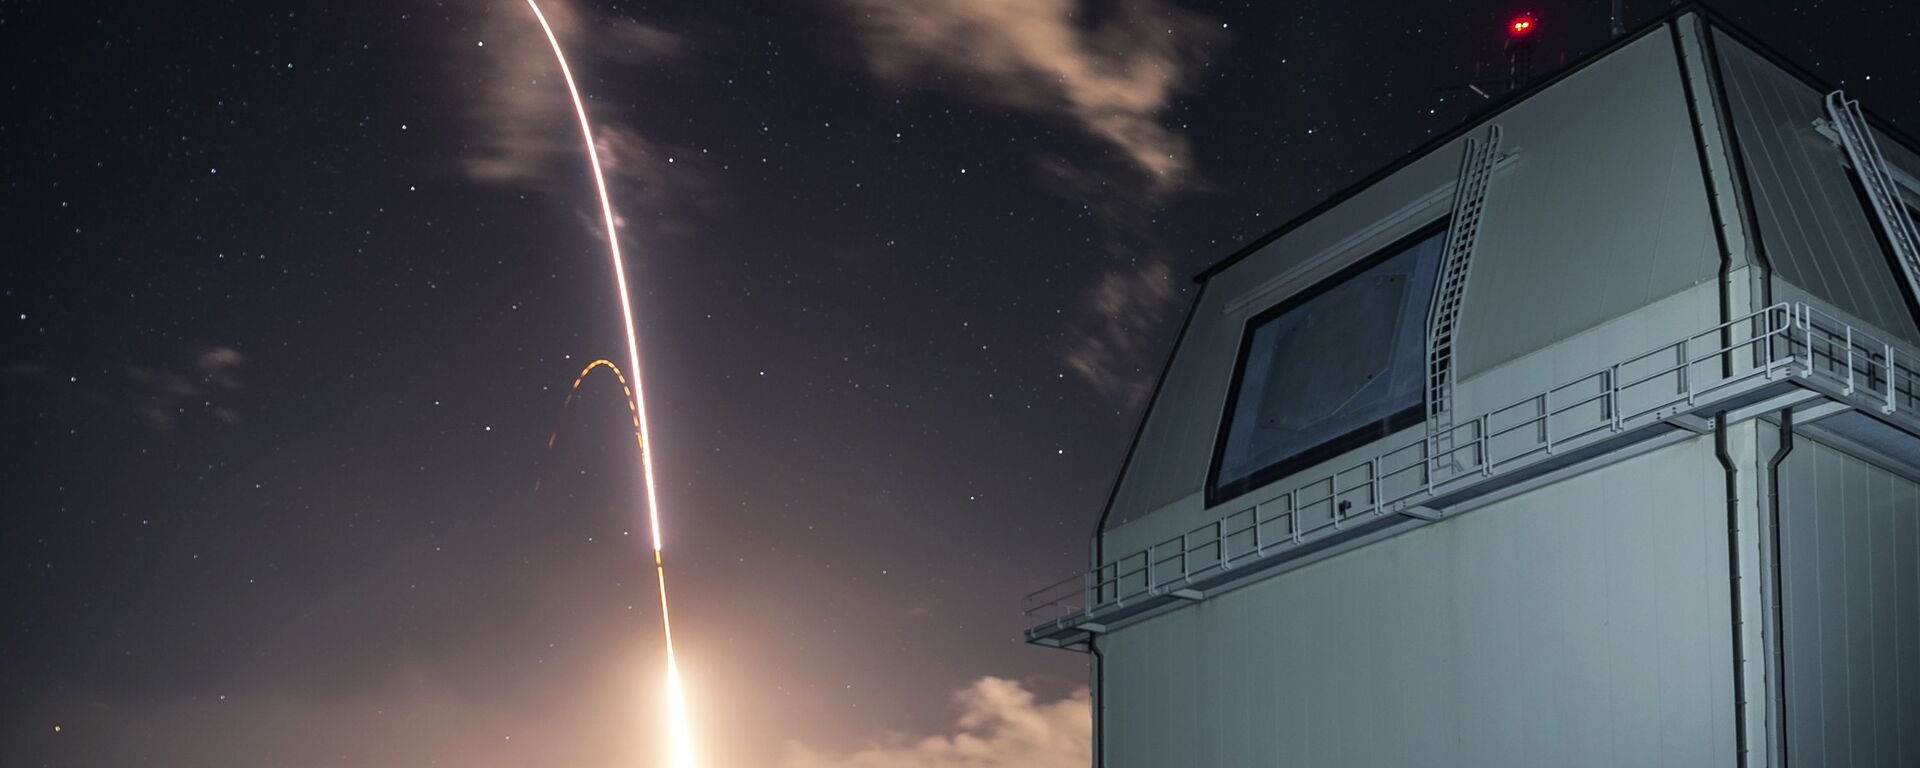 This December 10, 2018, file photo provided by the US Missile Defense Agency (MDA) shows the launch of the military's land-based Aegis missile defense testing system, that later intercepted an intermediate range ballistic missile, from the Pacific Missile Range Facility on the island of Kauai in Hawaii. - Sputnik International, 1920, 06.03.2023